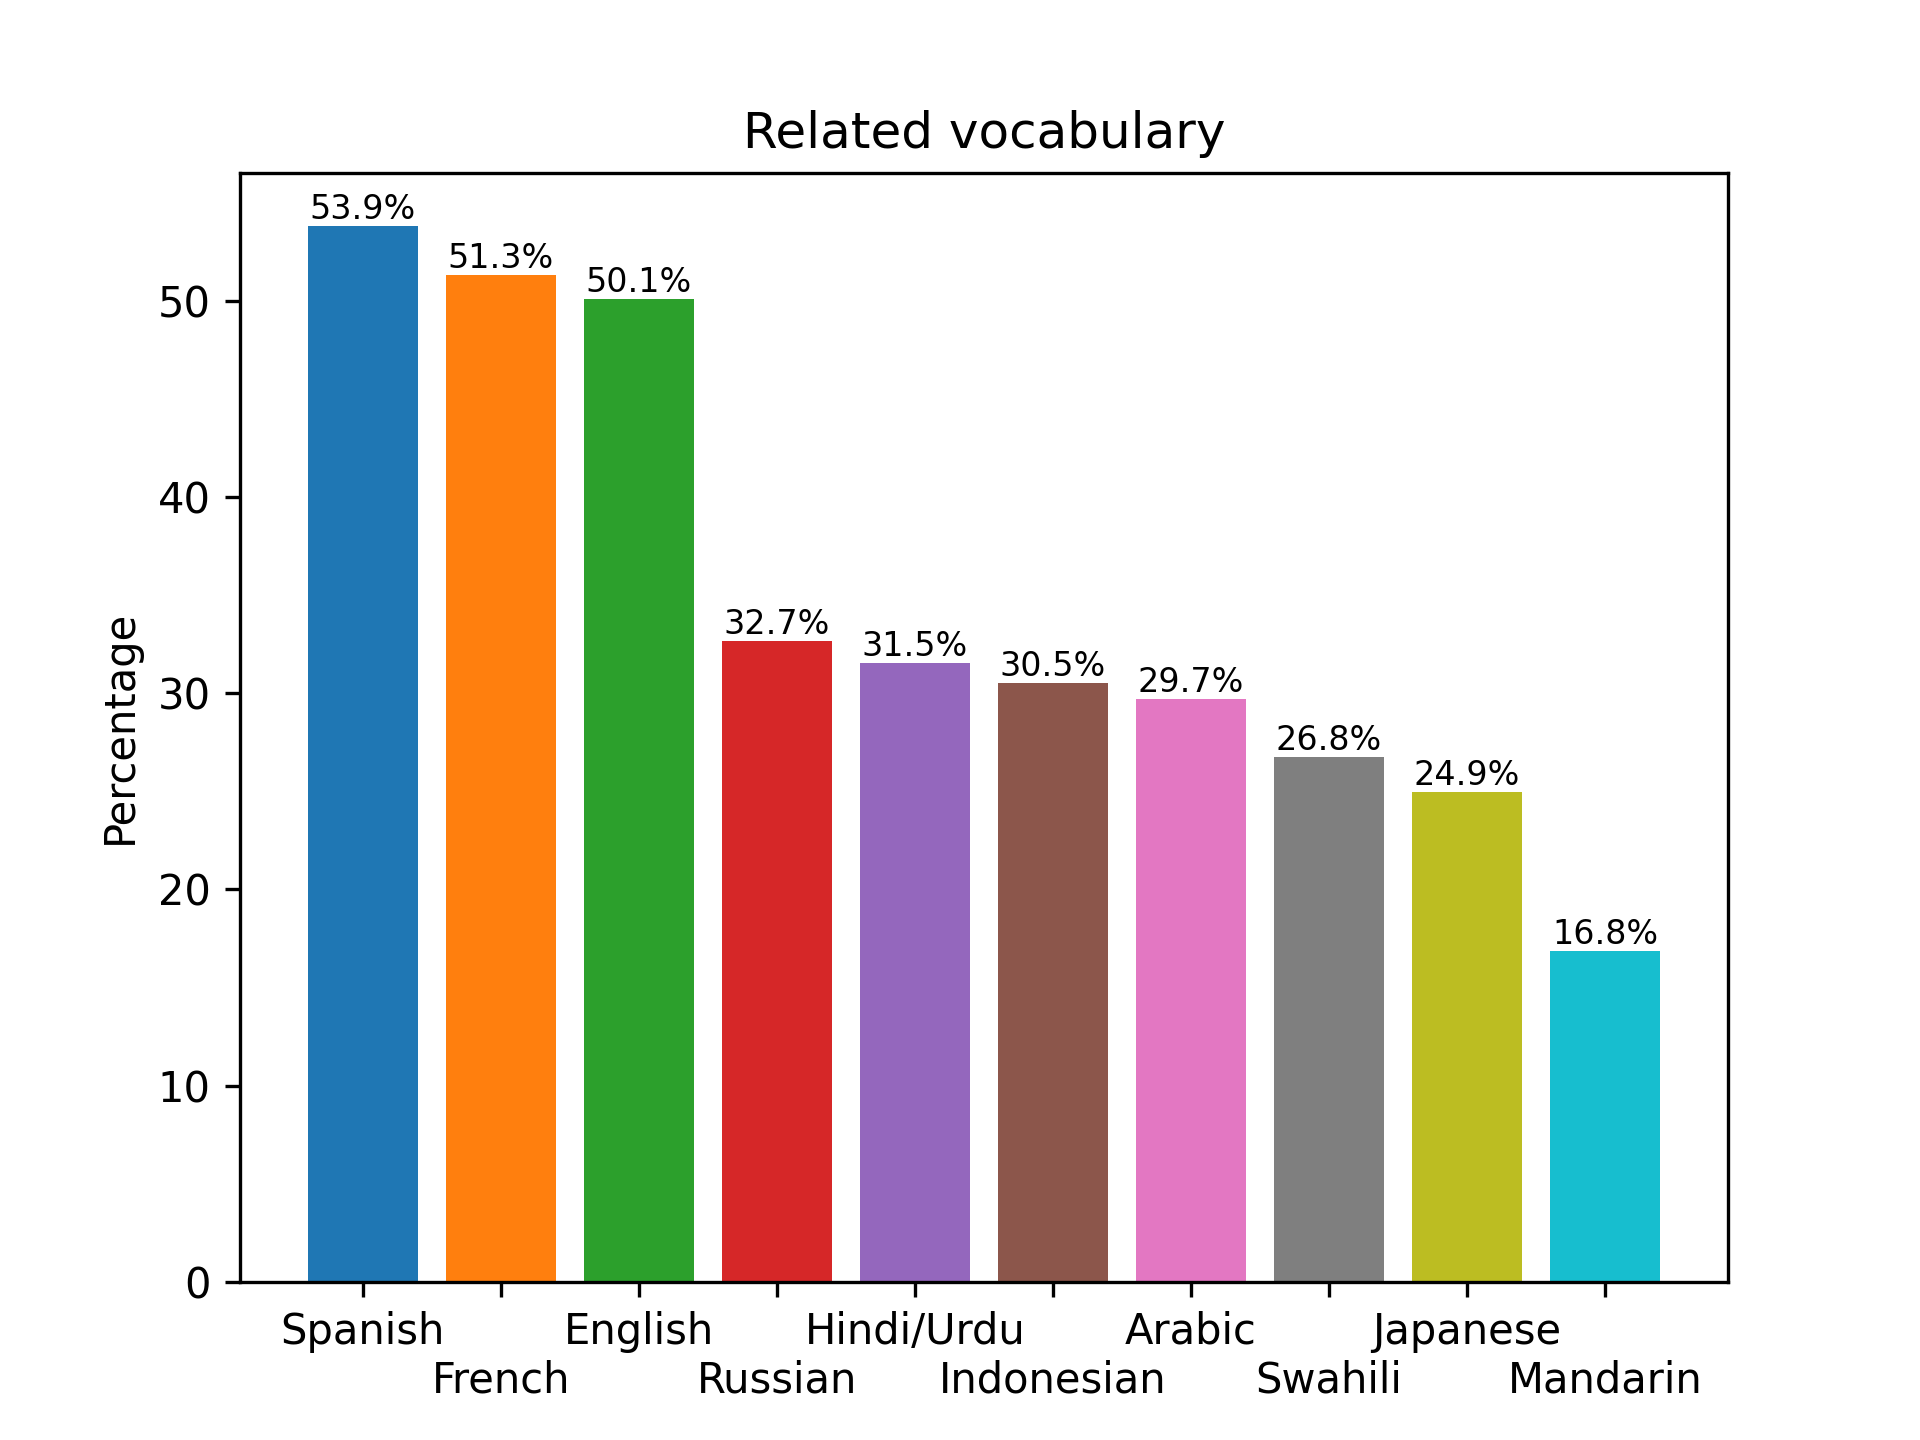 Related vocabulary percentages